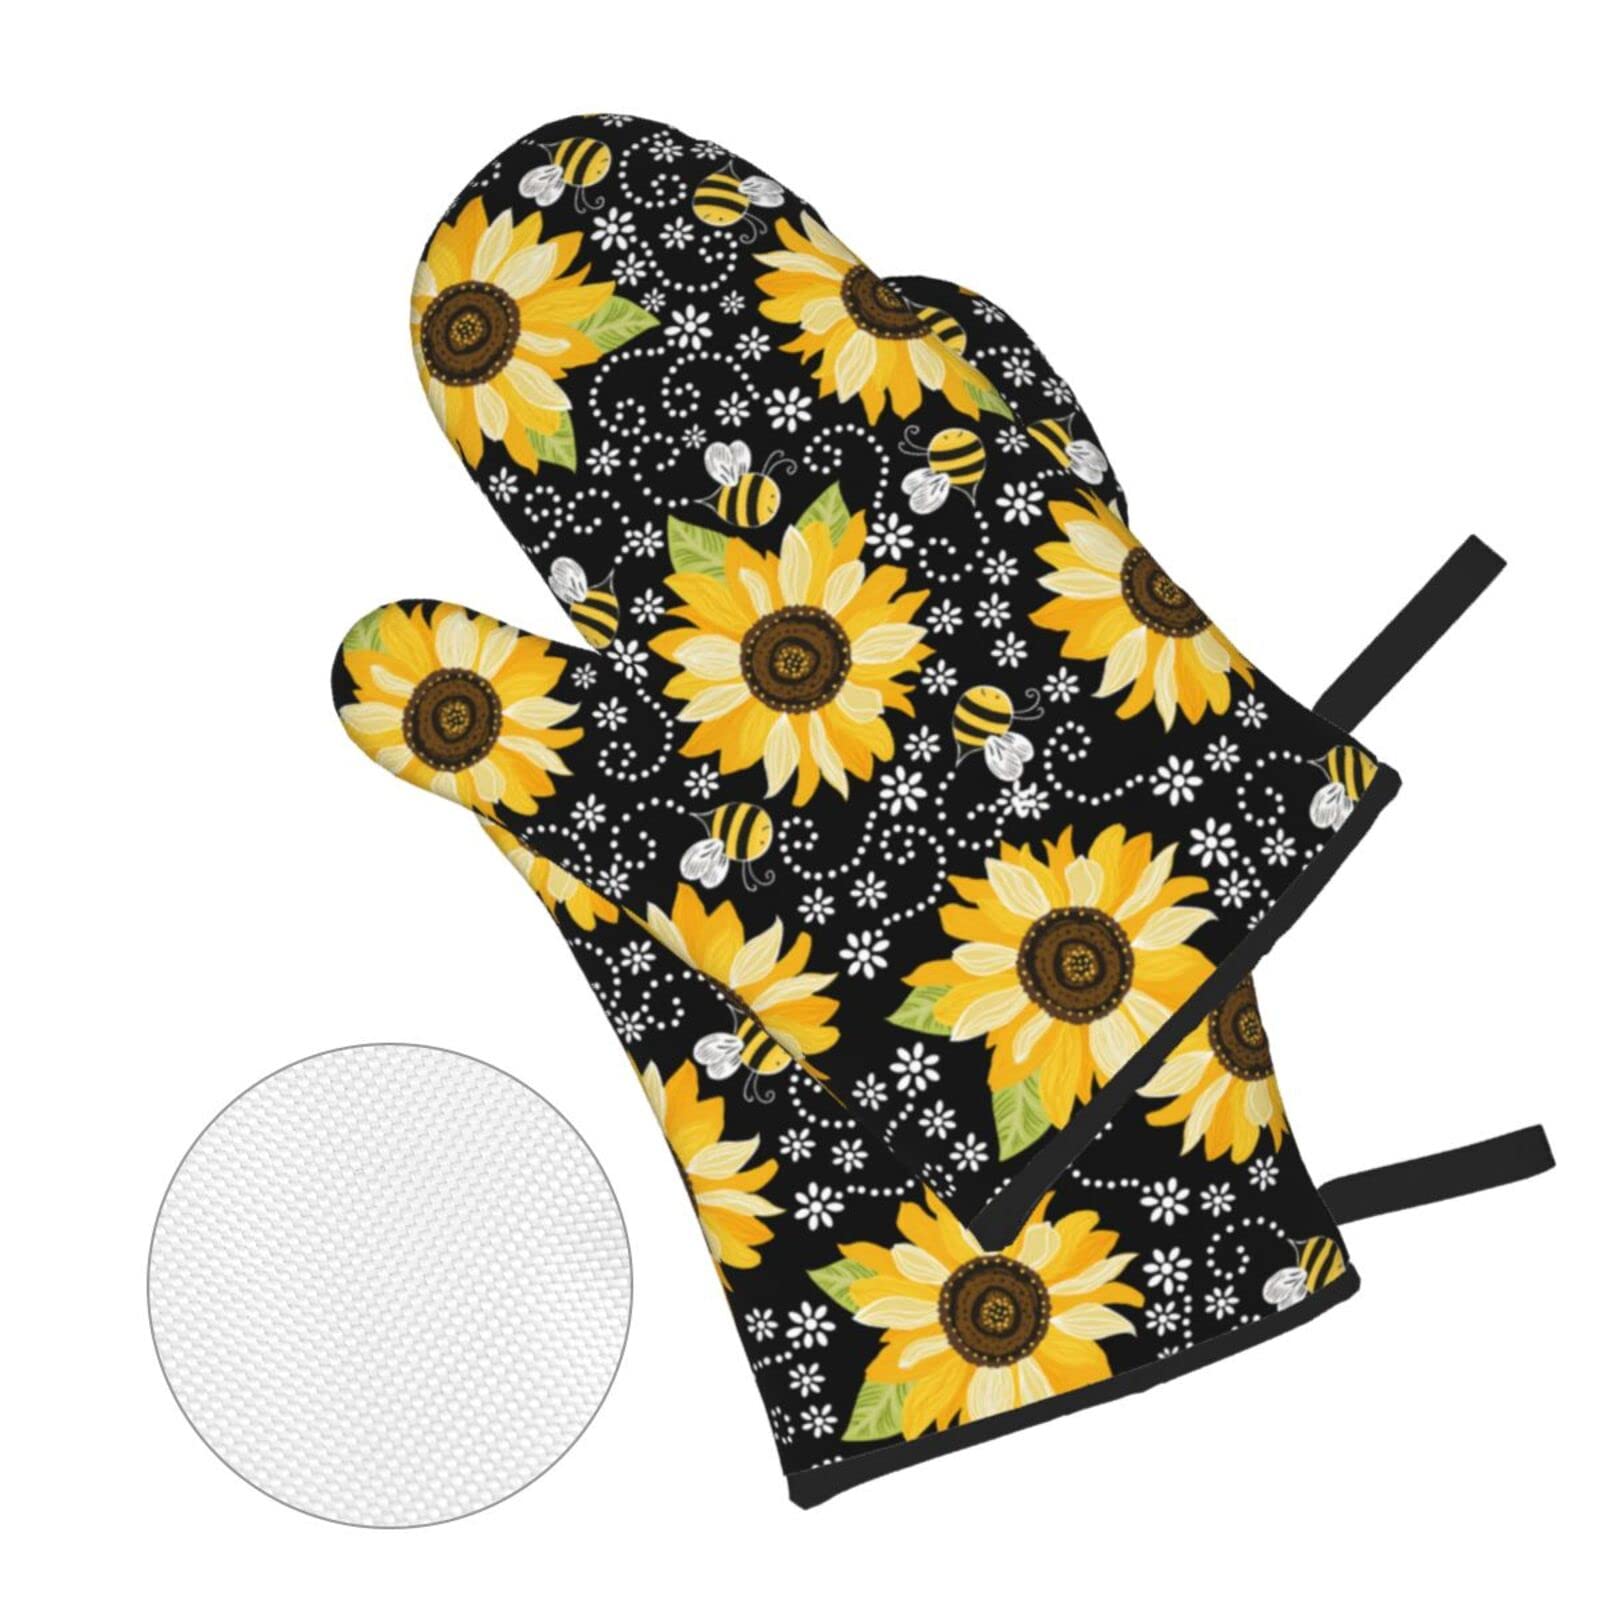 Sunflower Bees Oven Mitts and Pot Holders Sets of 4 High Heat Resistant Oven Mitts with Oven Gloves and Hot Pads Polyester Potholders for Kitchen Baking Grilling BBQ Non-Slip Cooking Mitts